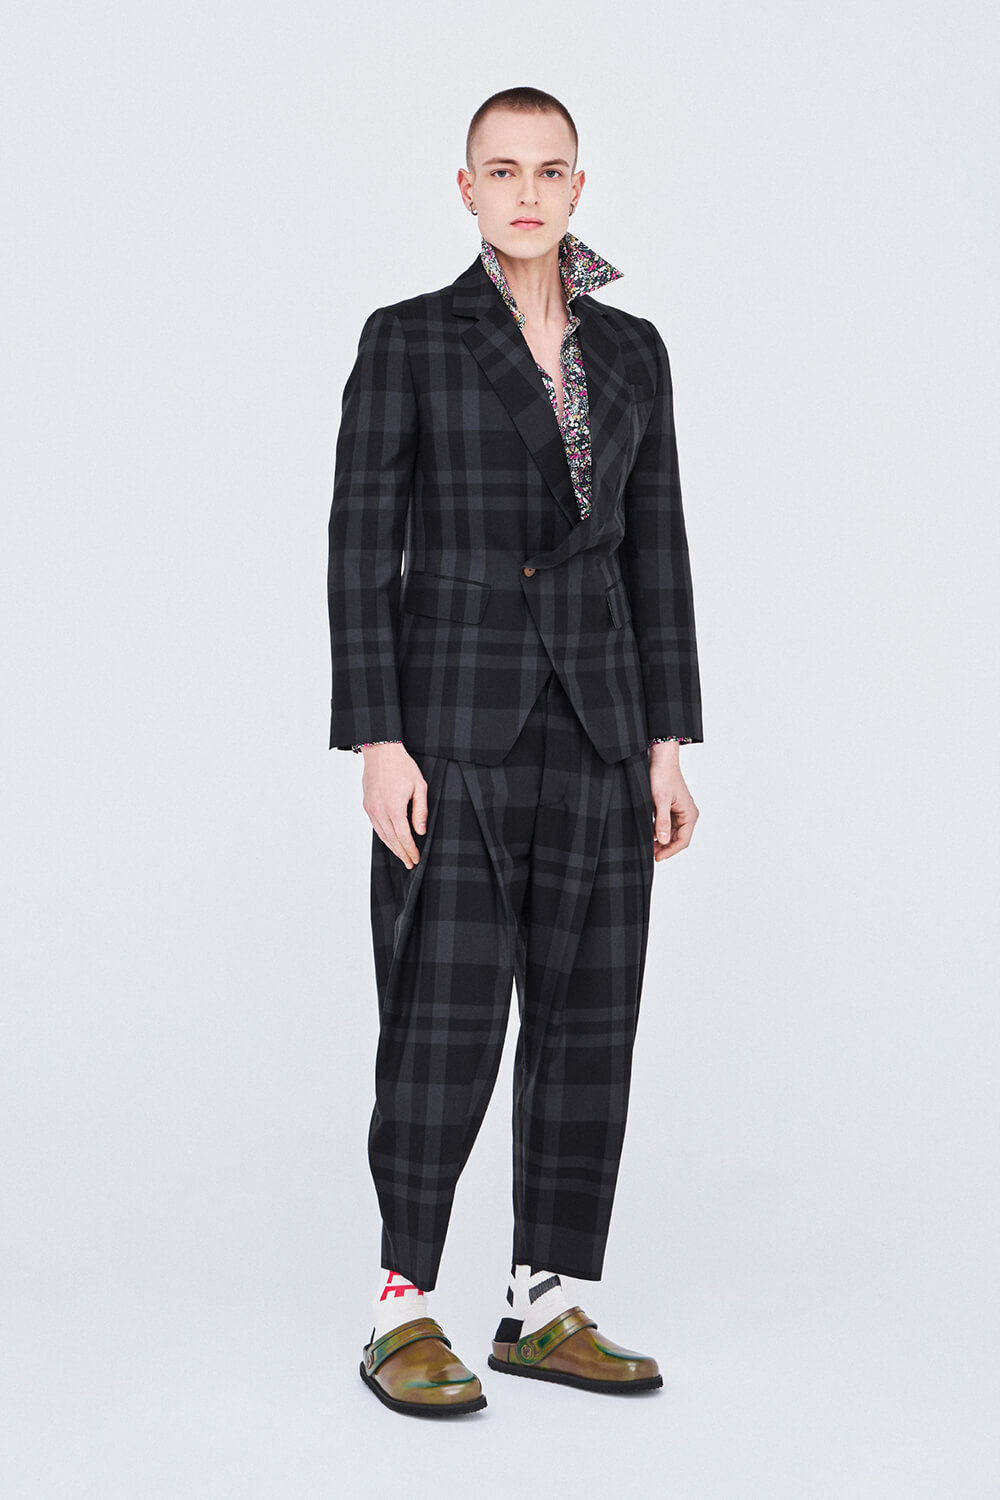 Vivienne Westwood MAN | COLLECTION | HOUYHNHNM（フイナム）